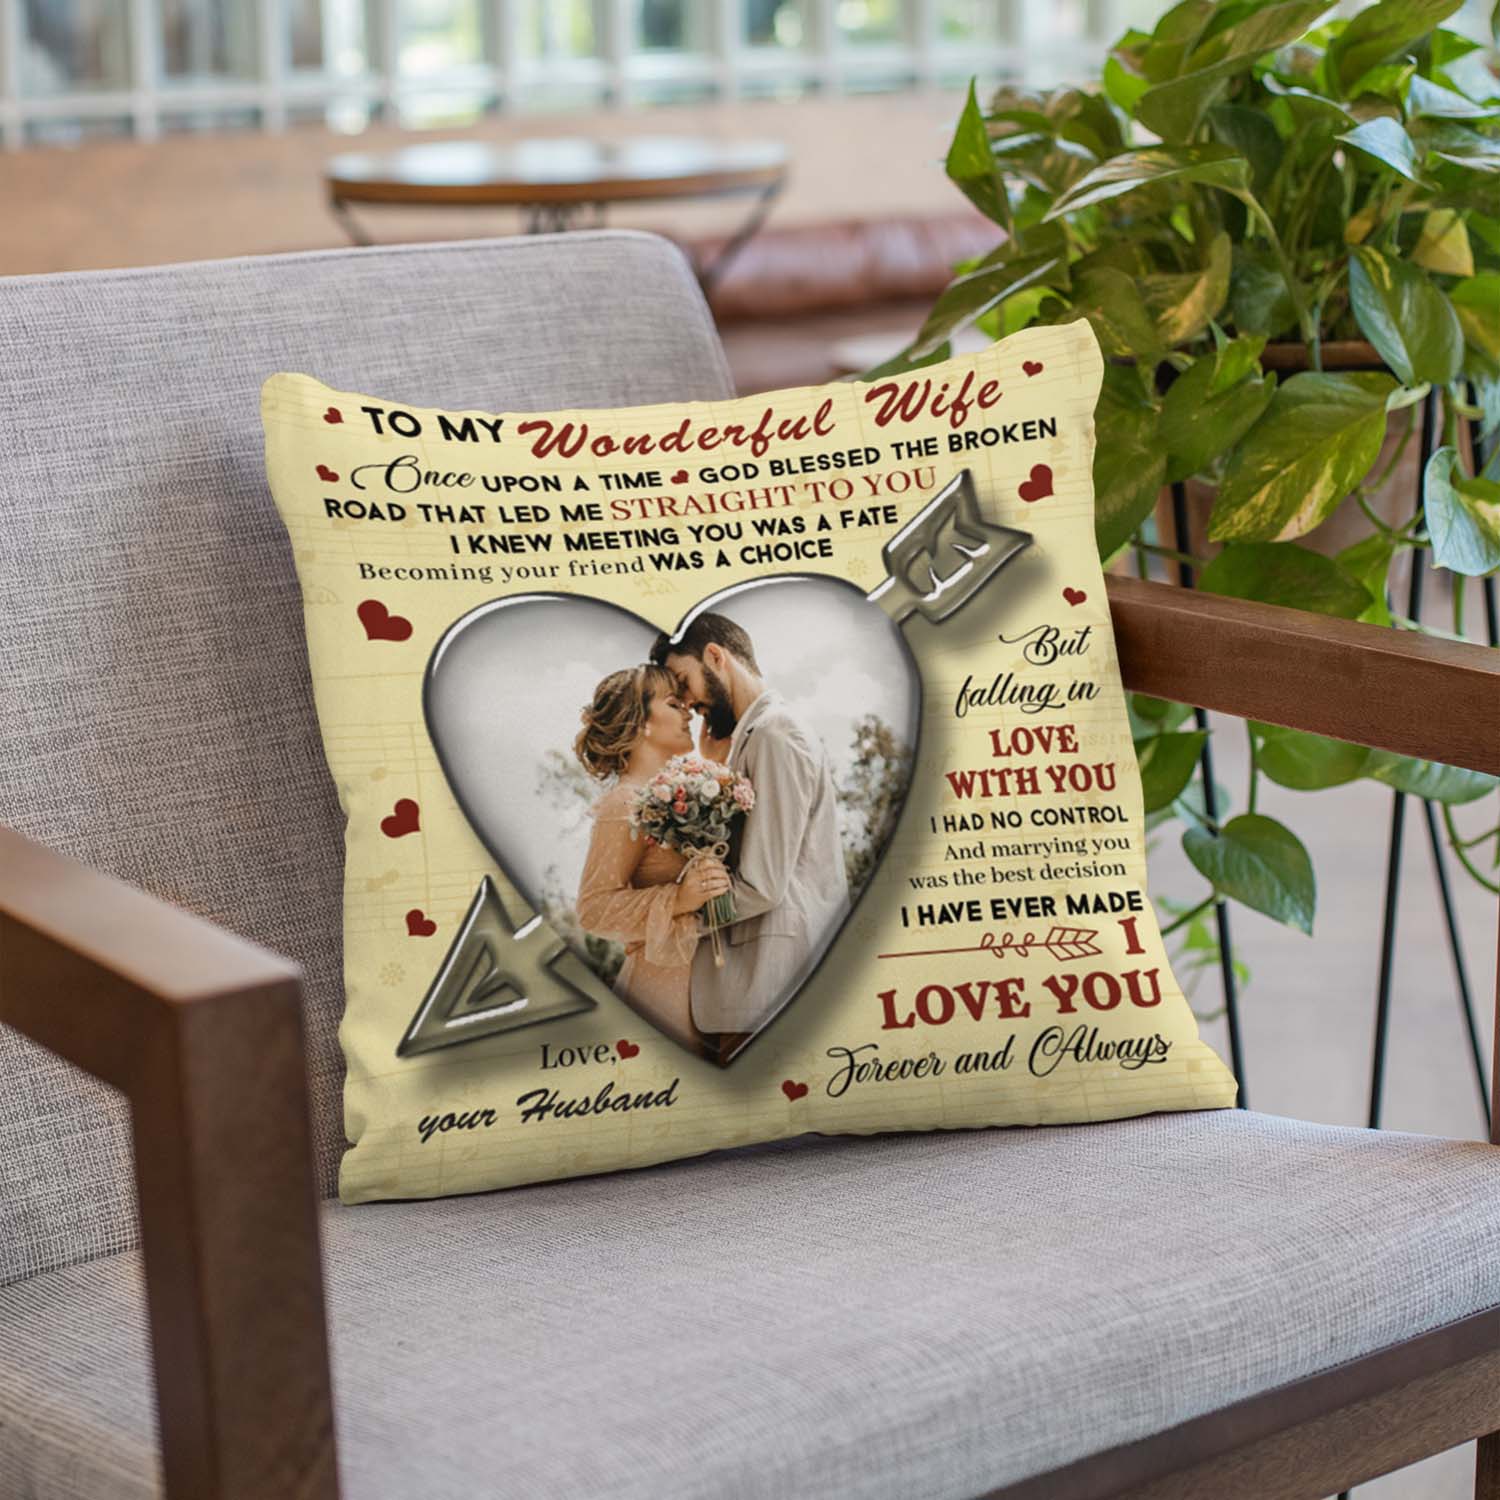 To My Wonderful Wife, I Love You Forevers And Always, Custom Photo And Name Pillow